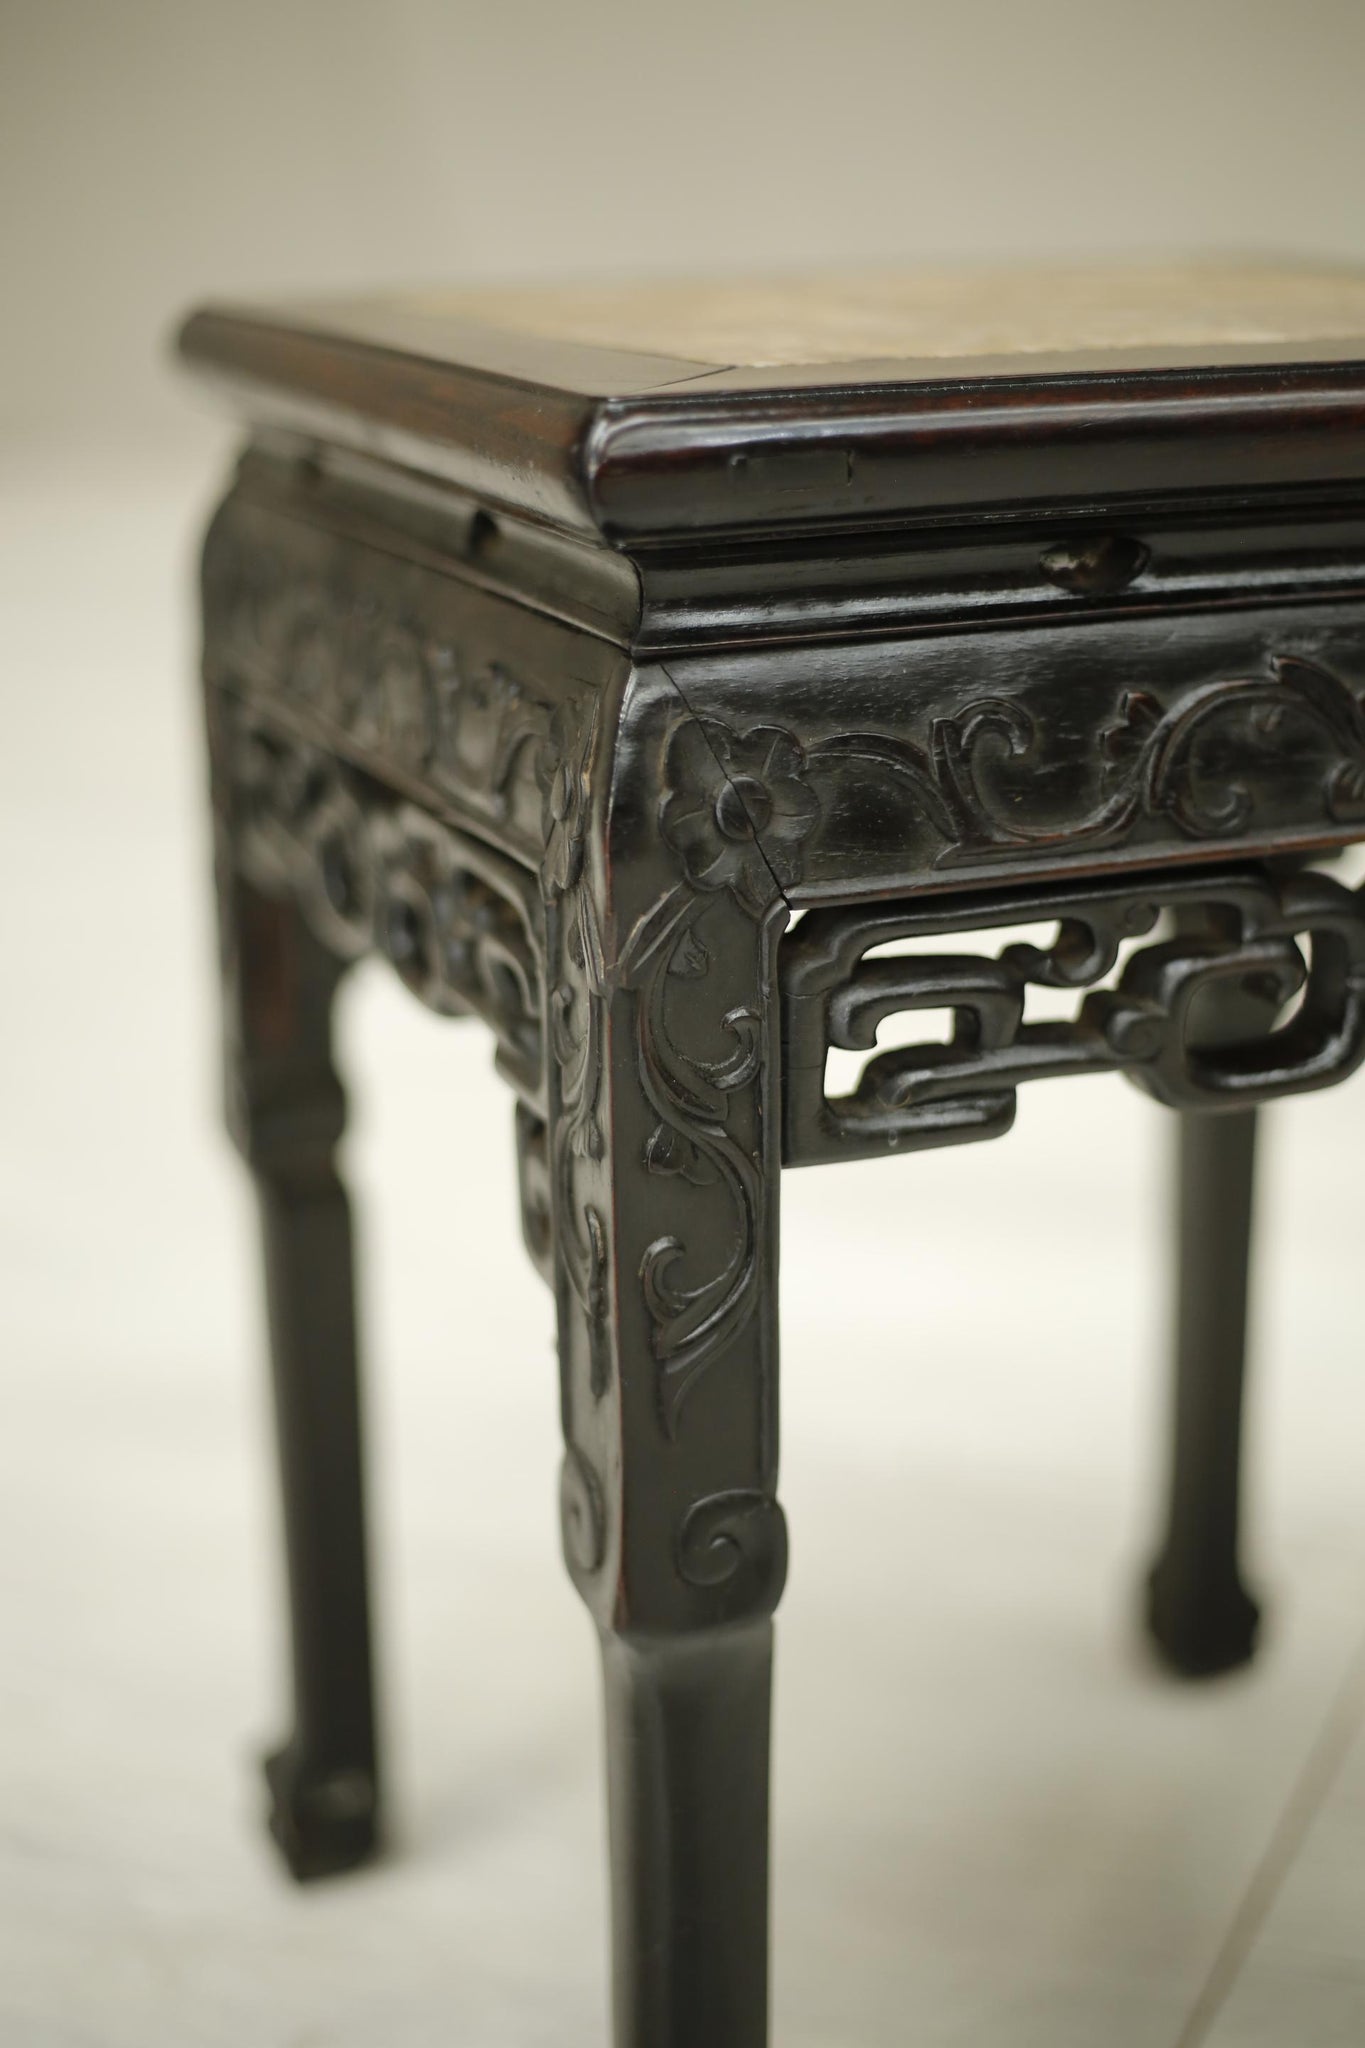 19th century Antique Chinese marble topped side table - TallBoy Interiors